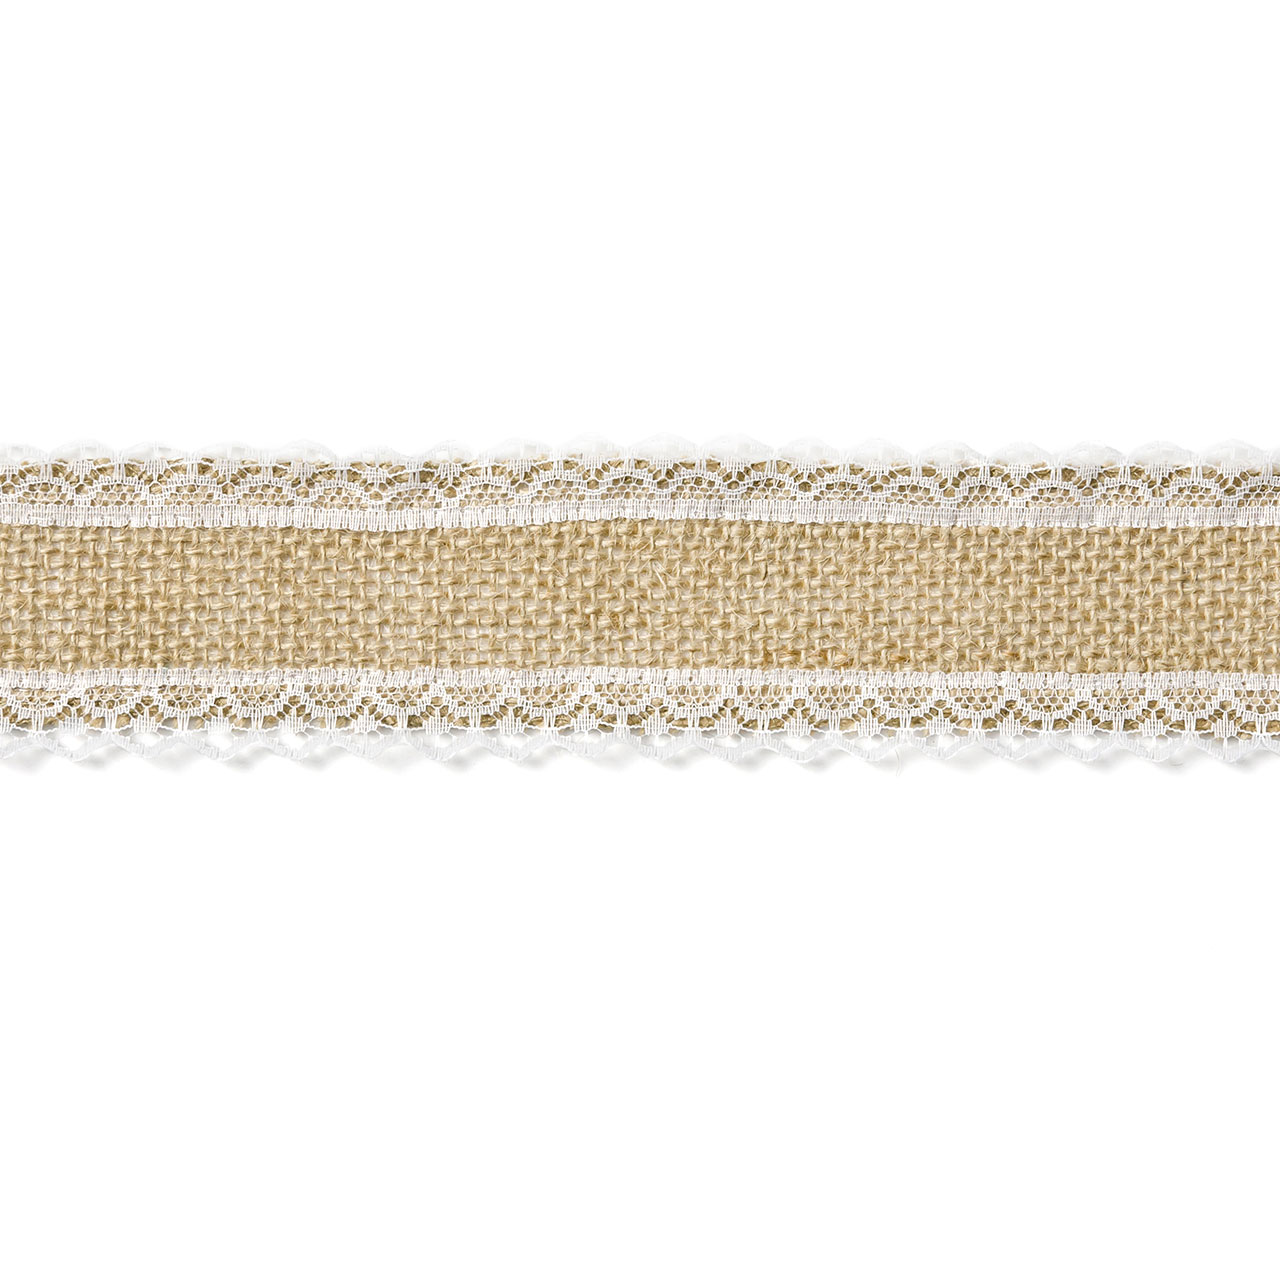 Jute Tape with Lace Edging